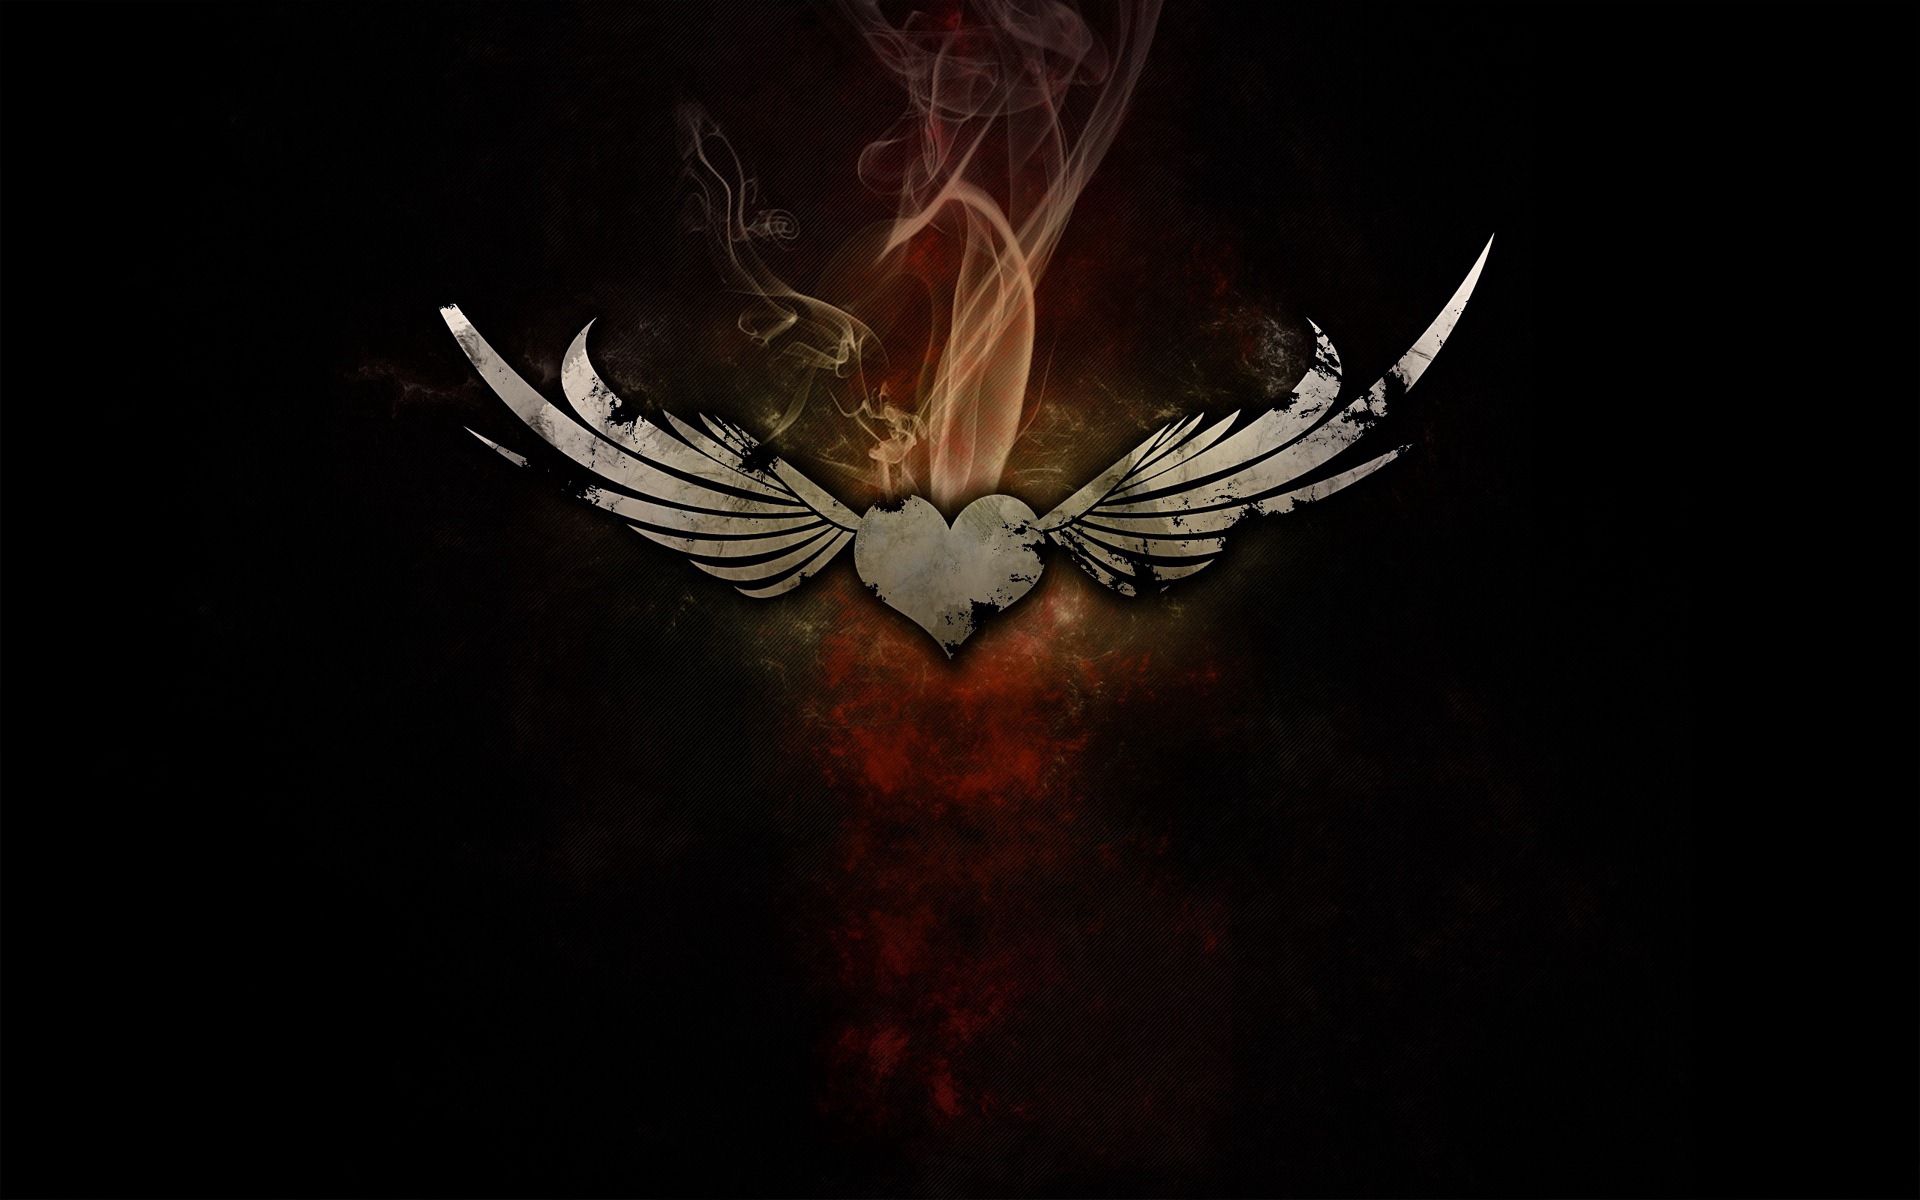 heart, abstract, smoke, dark background, wings